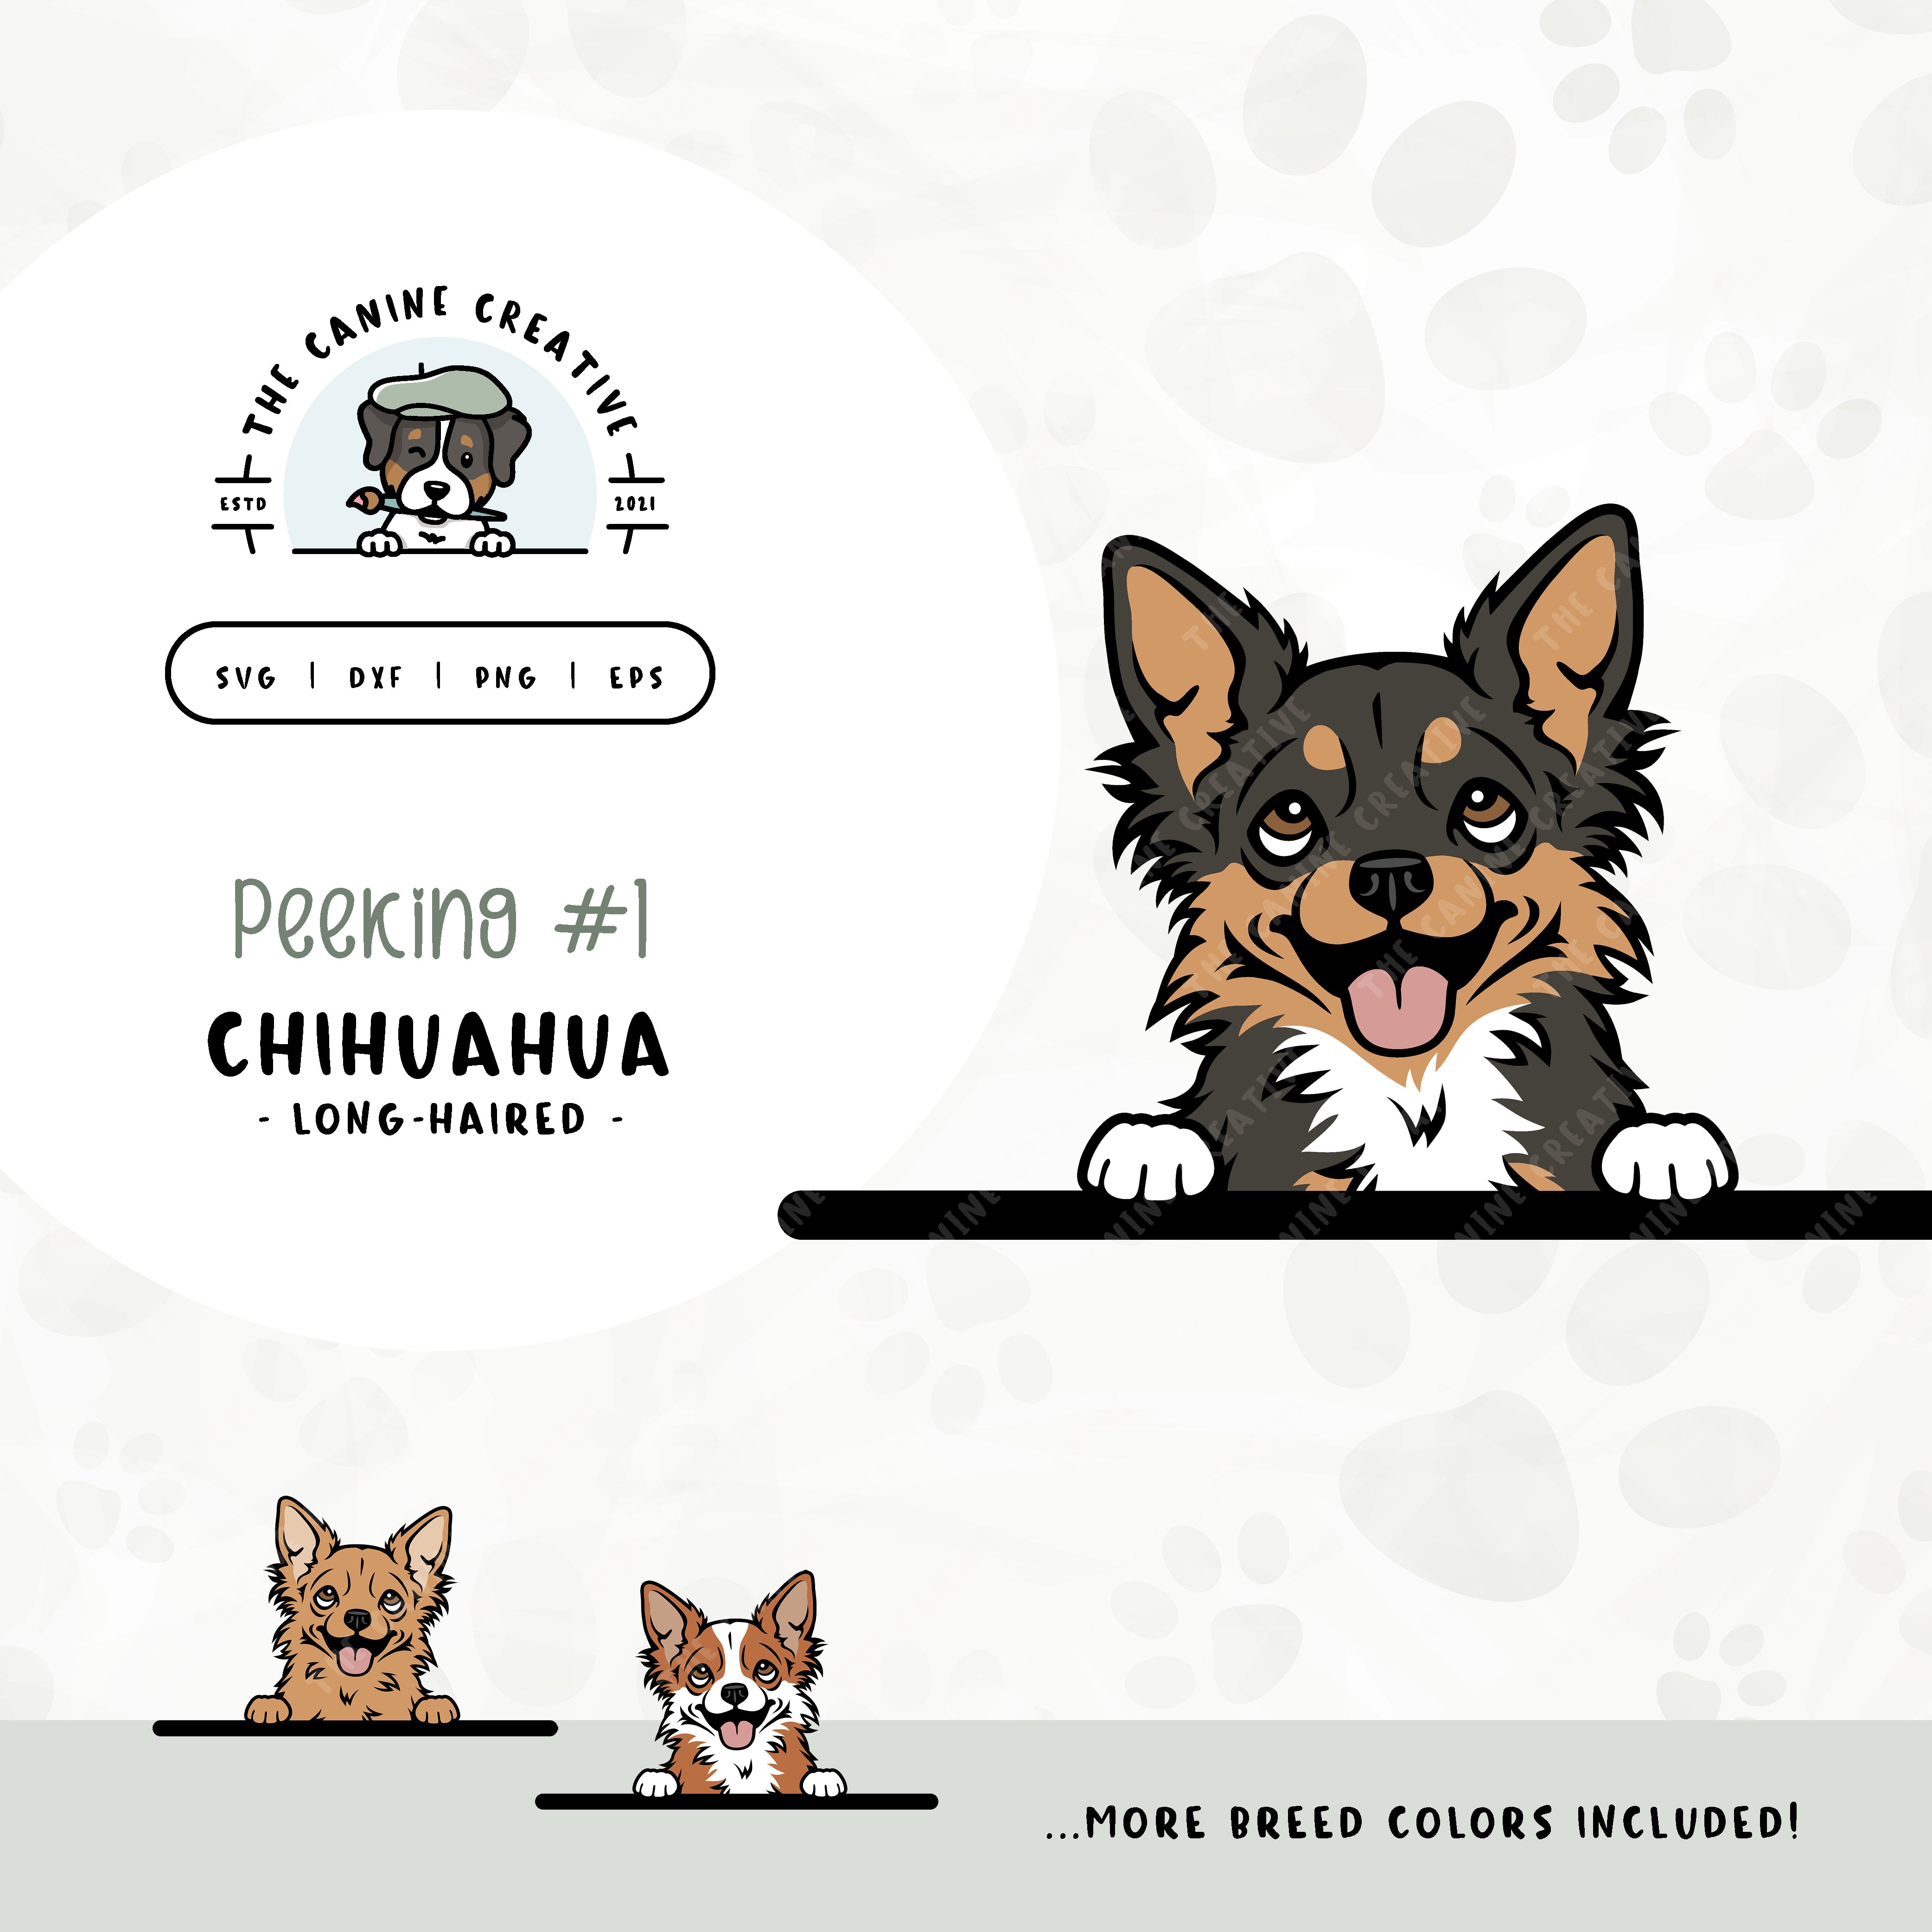 This illustrated design features a peeking long haired Chihuahua. File formats include: SVG, DXF, PNG, and EPS.